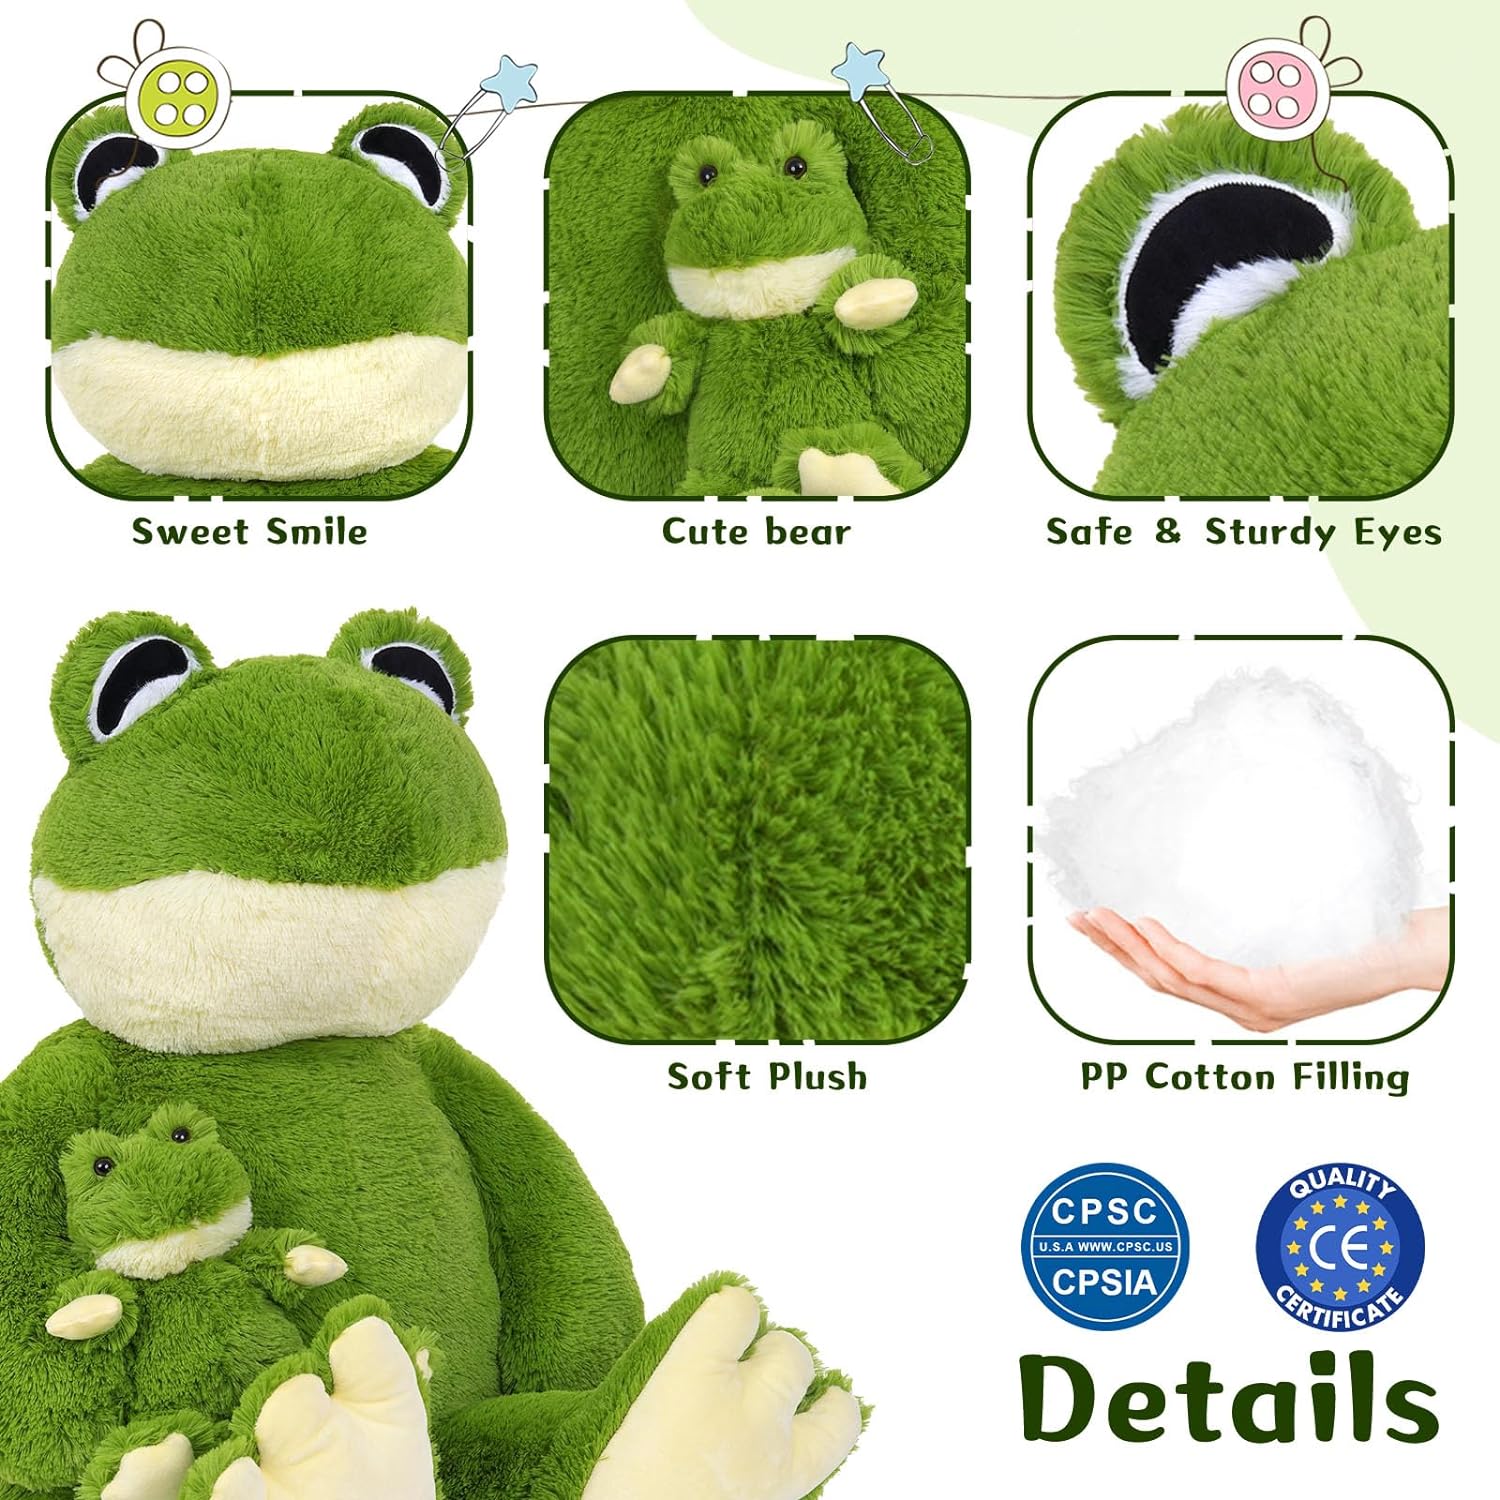 Frog Plush Toys Frog Stuffed Animals, Green, 36.2 Inches